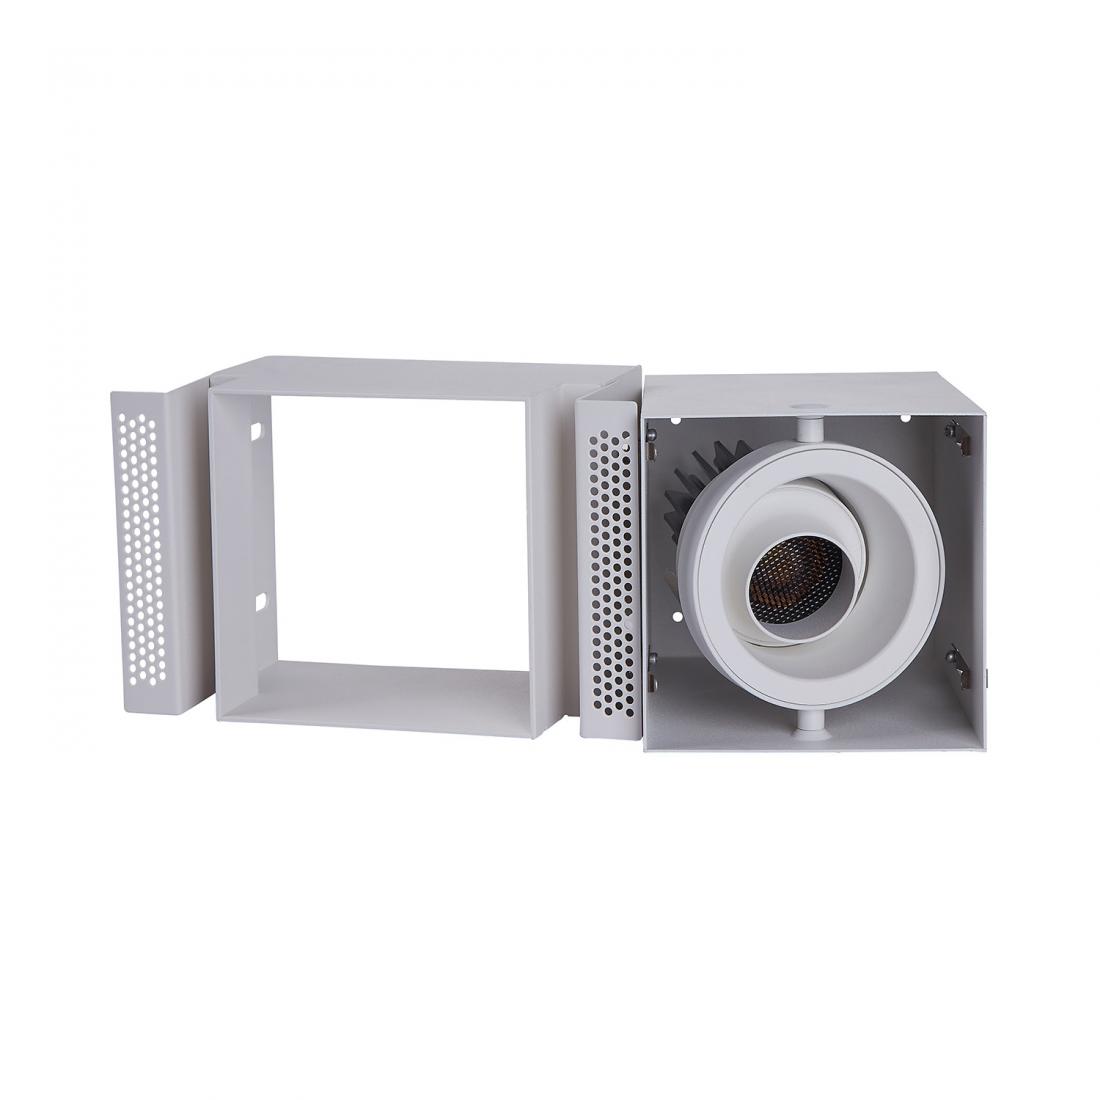 10W grille adjustable LED recessed downlight